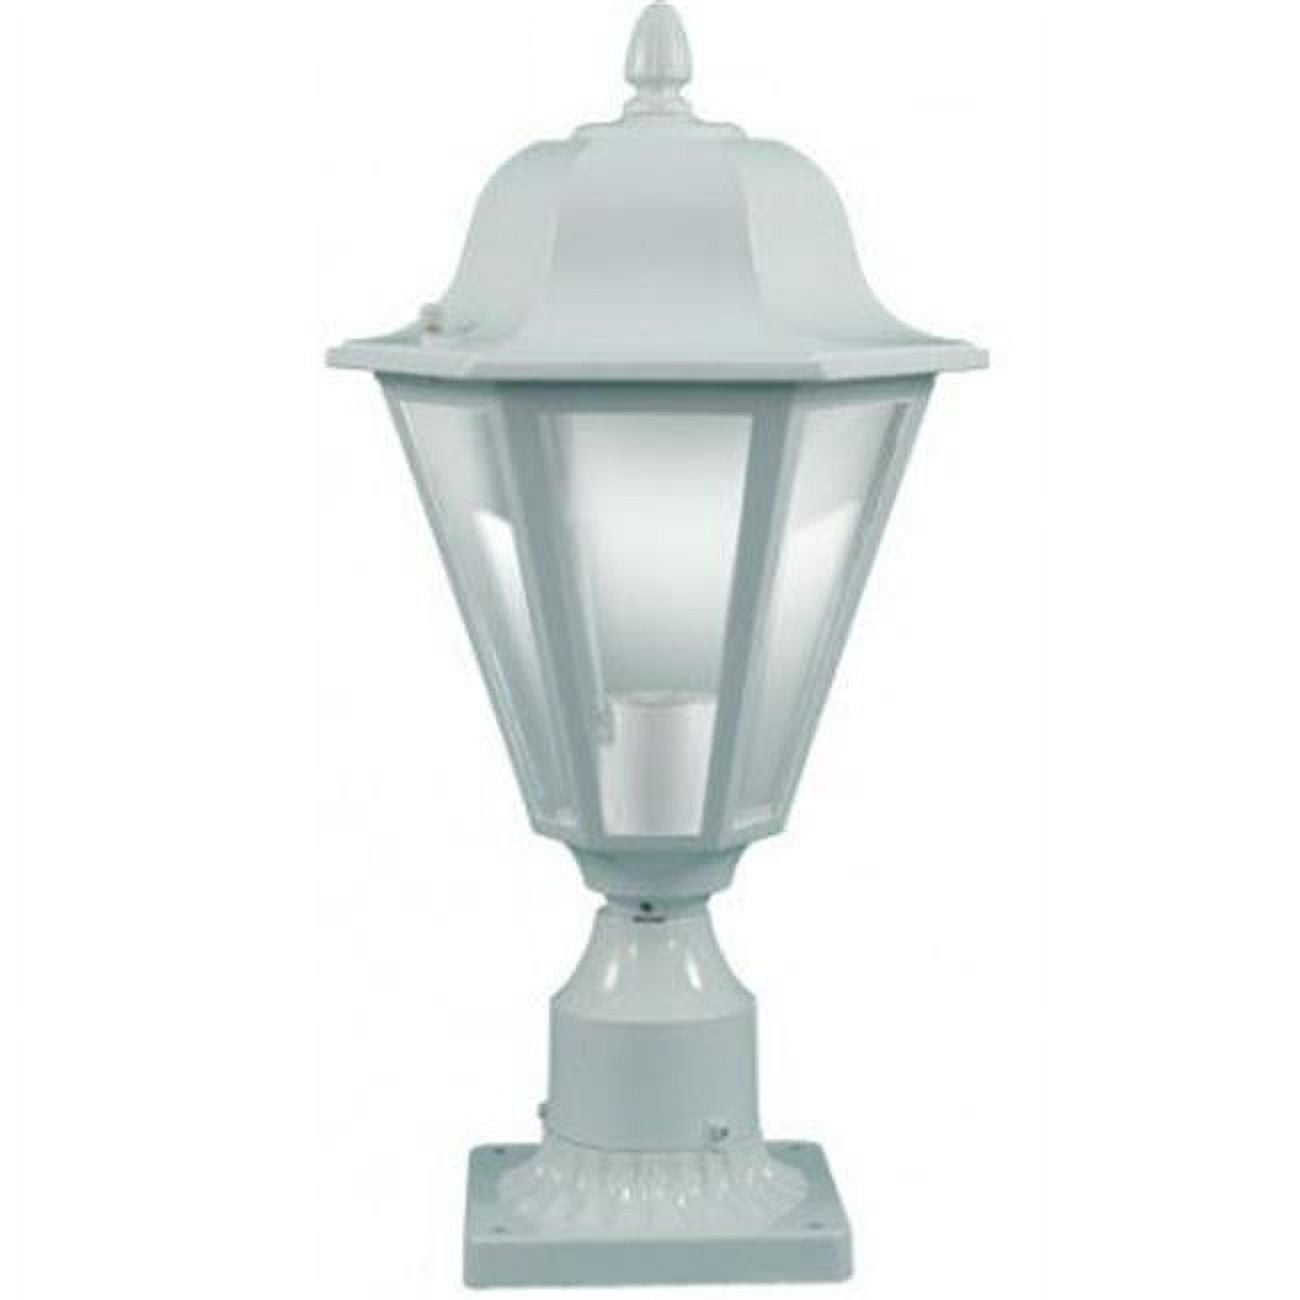 Picture of Dabmar Lighting GM132-W-FROST 120V Incandescent Daniella Post Top Light Fixture with Frosted Glass - White